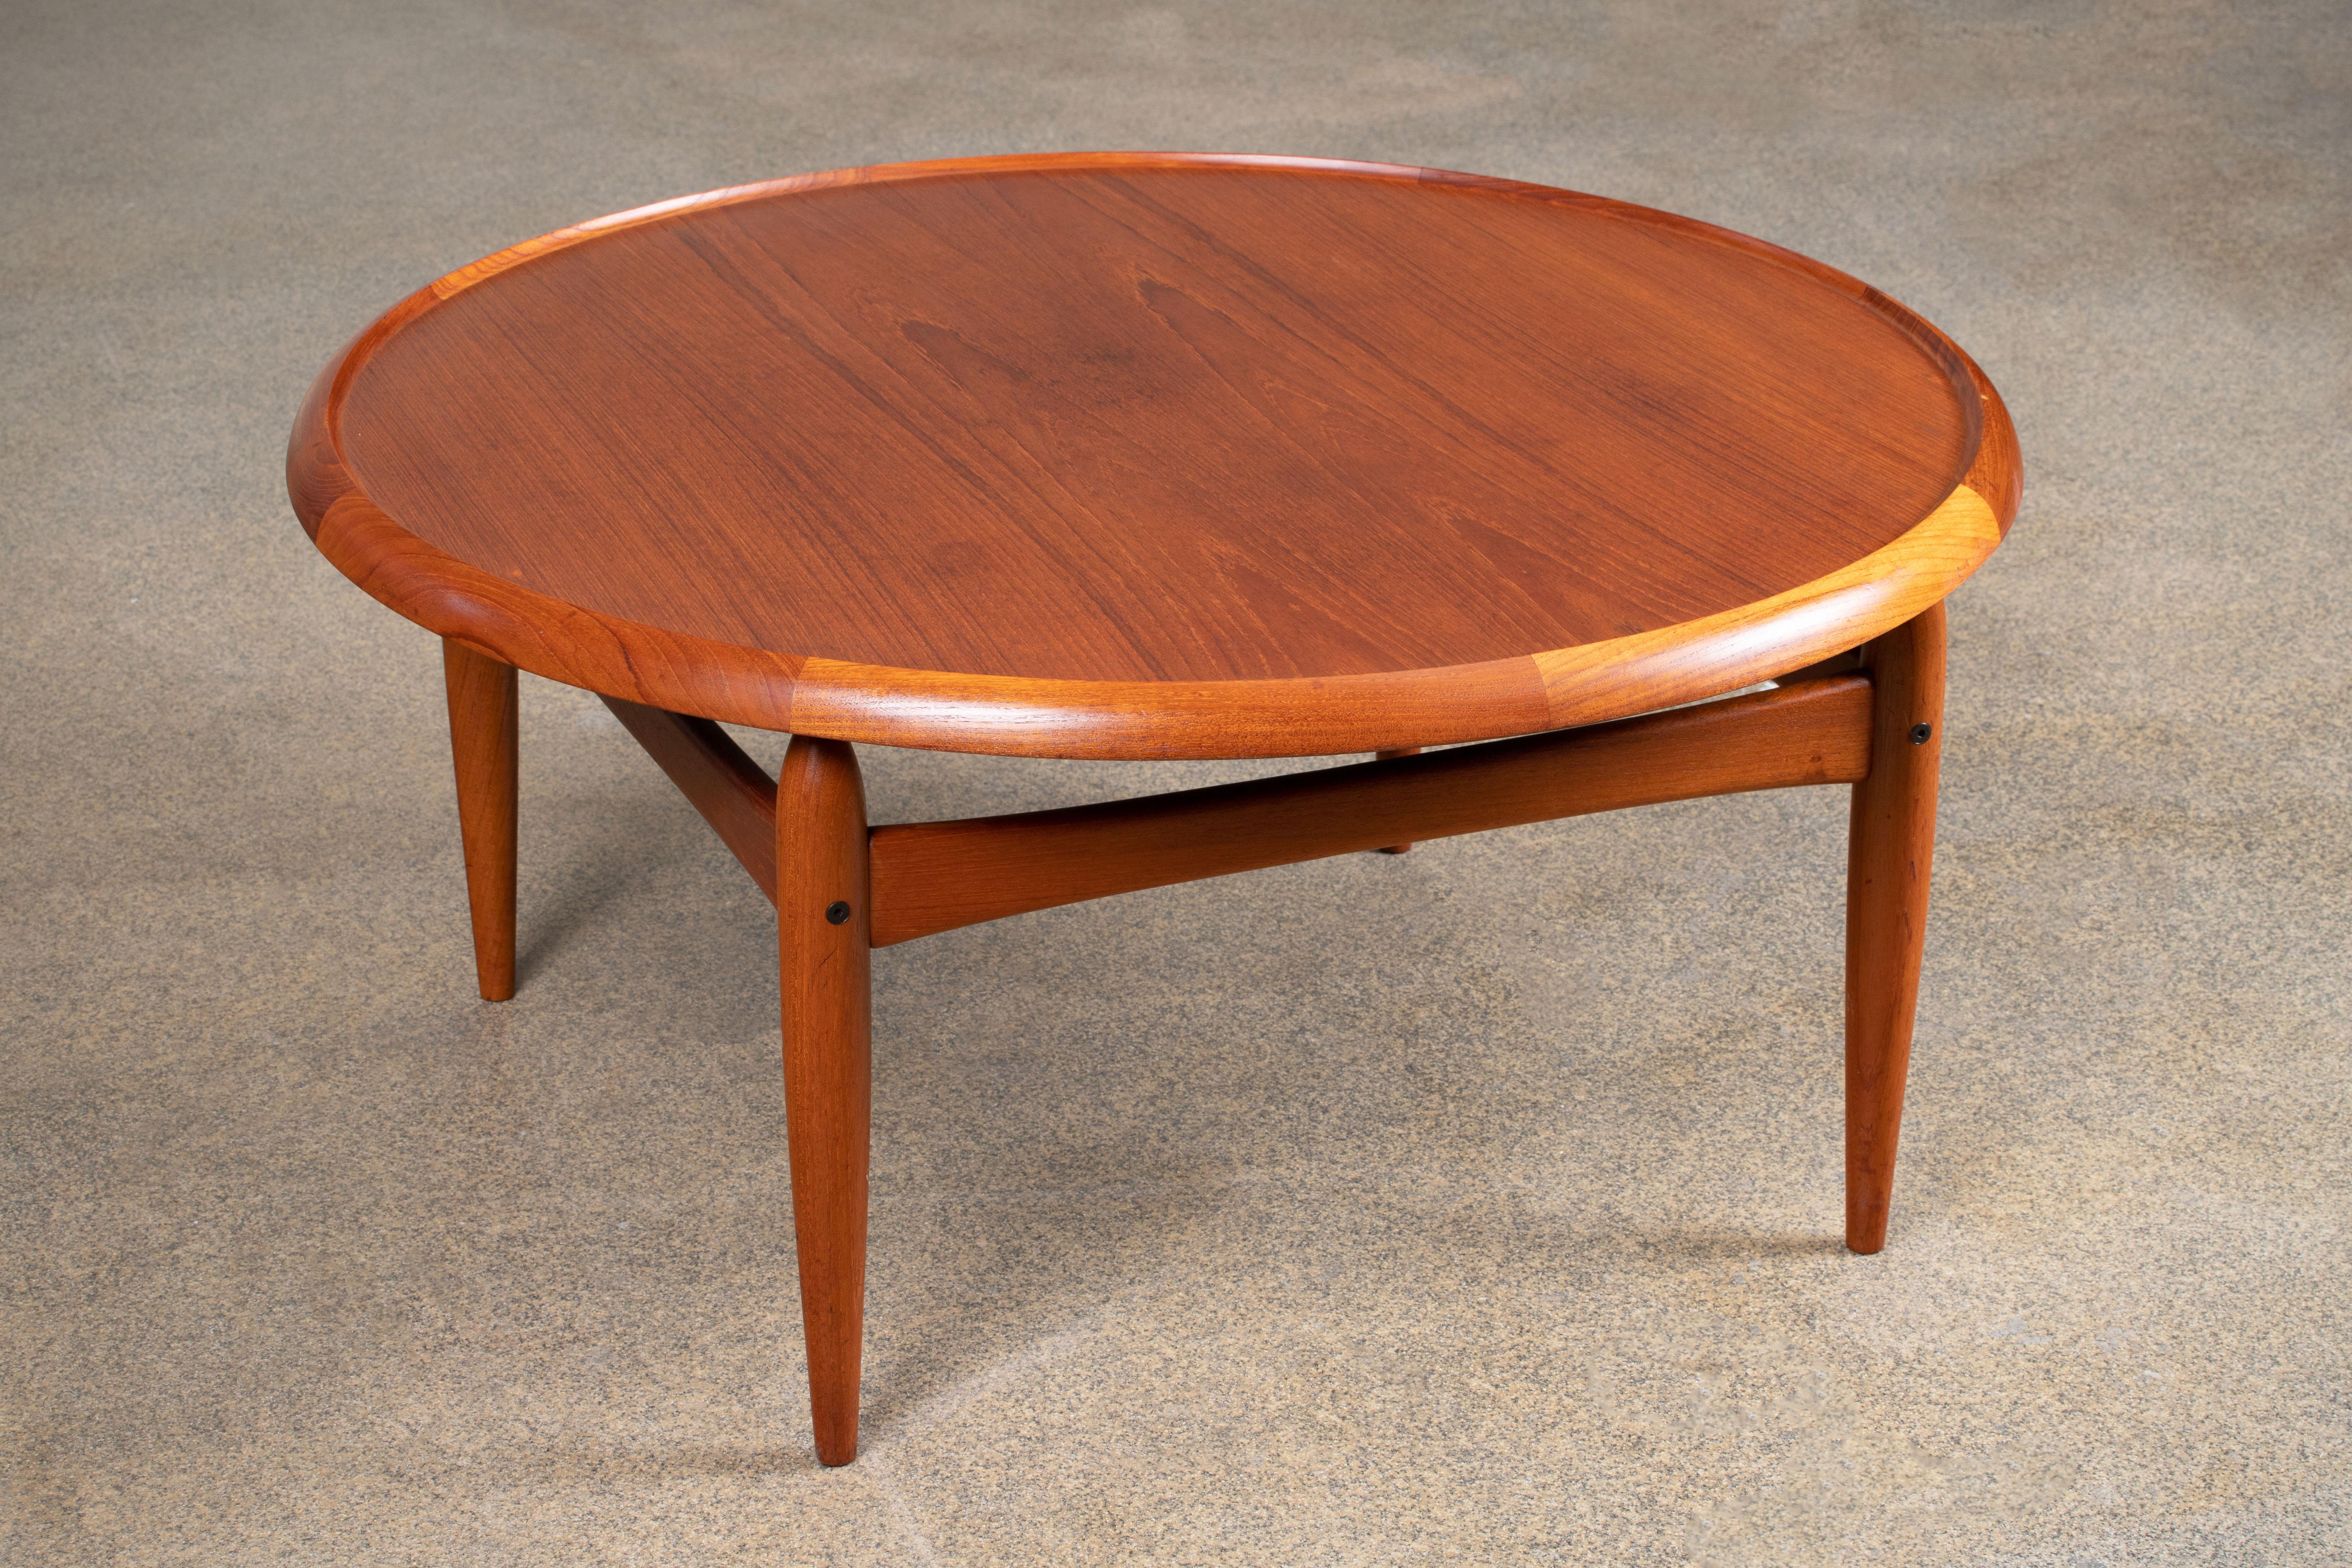 Very rare coffee table with reversible top, designed by Kurt Østervig and produced by Jason Møbler, Denmark. The table is made of teakwood and features a black formica top.